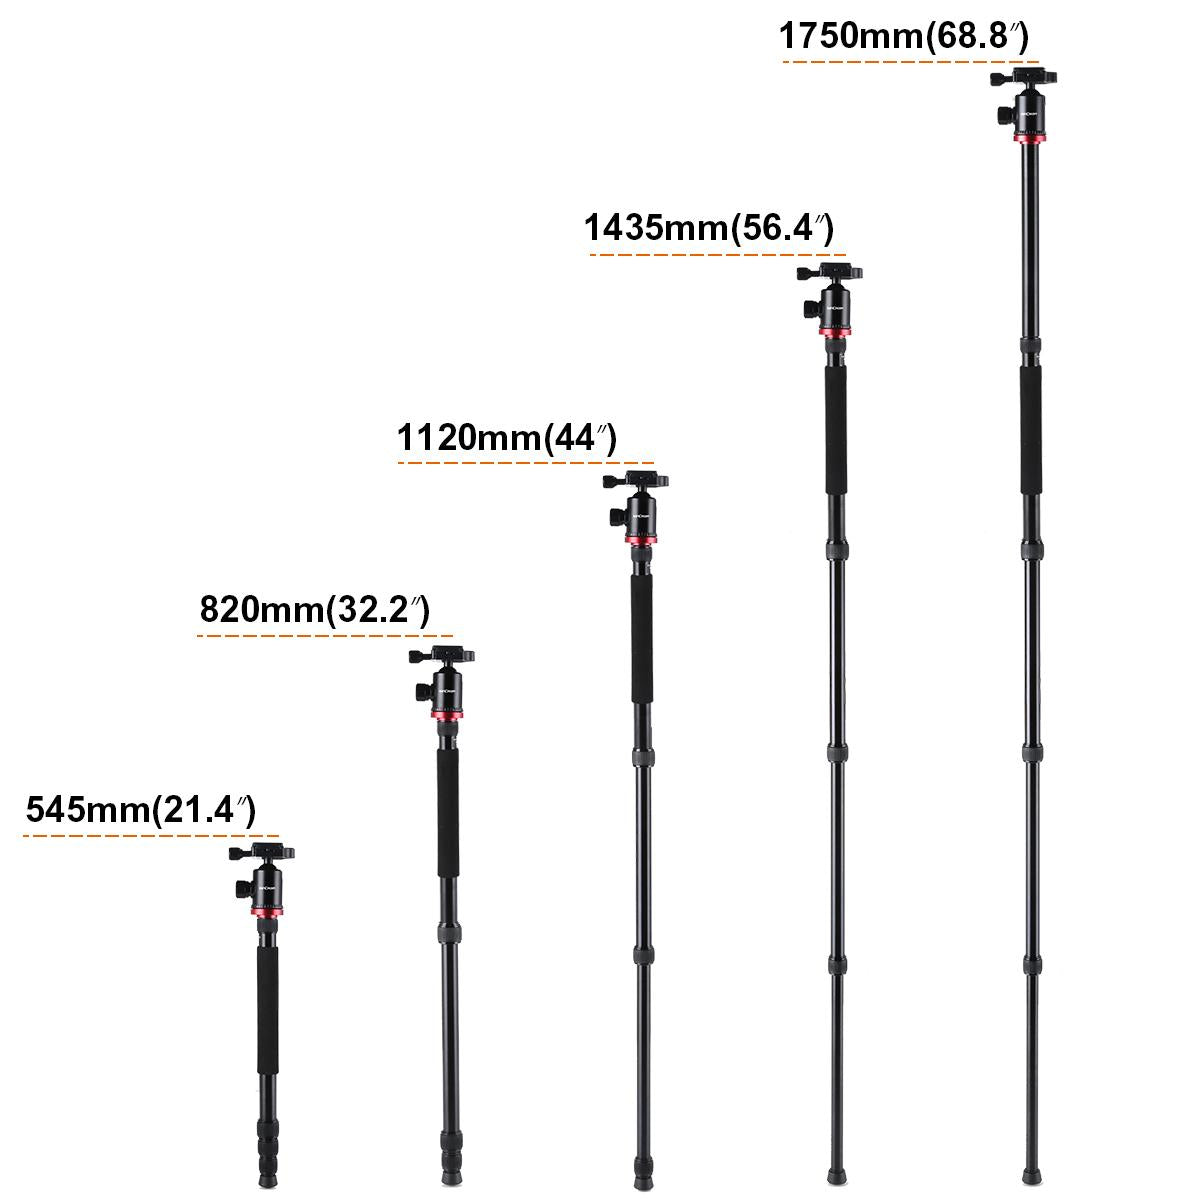 Image of K&F Concept 66"/161cm Ultra Compact and Lightweight Aluminum Travel Tripod